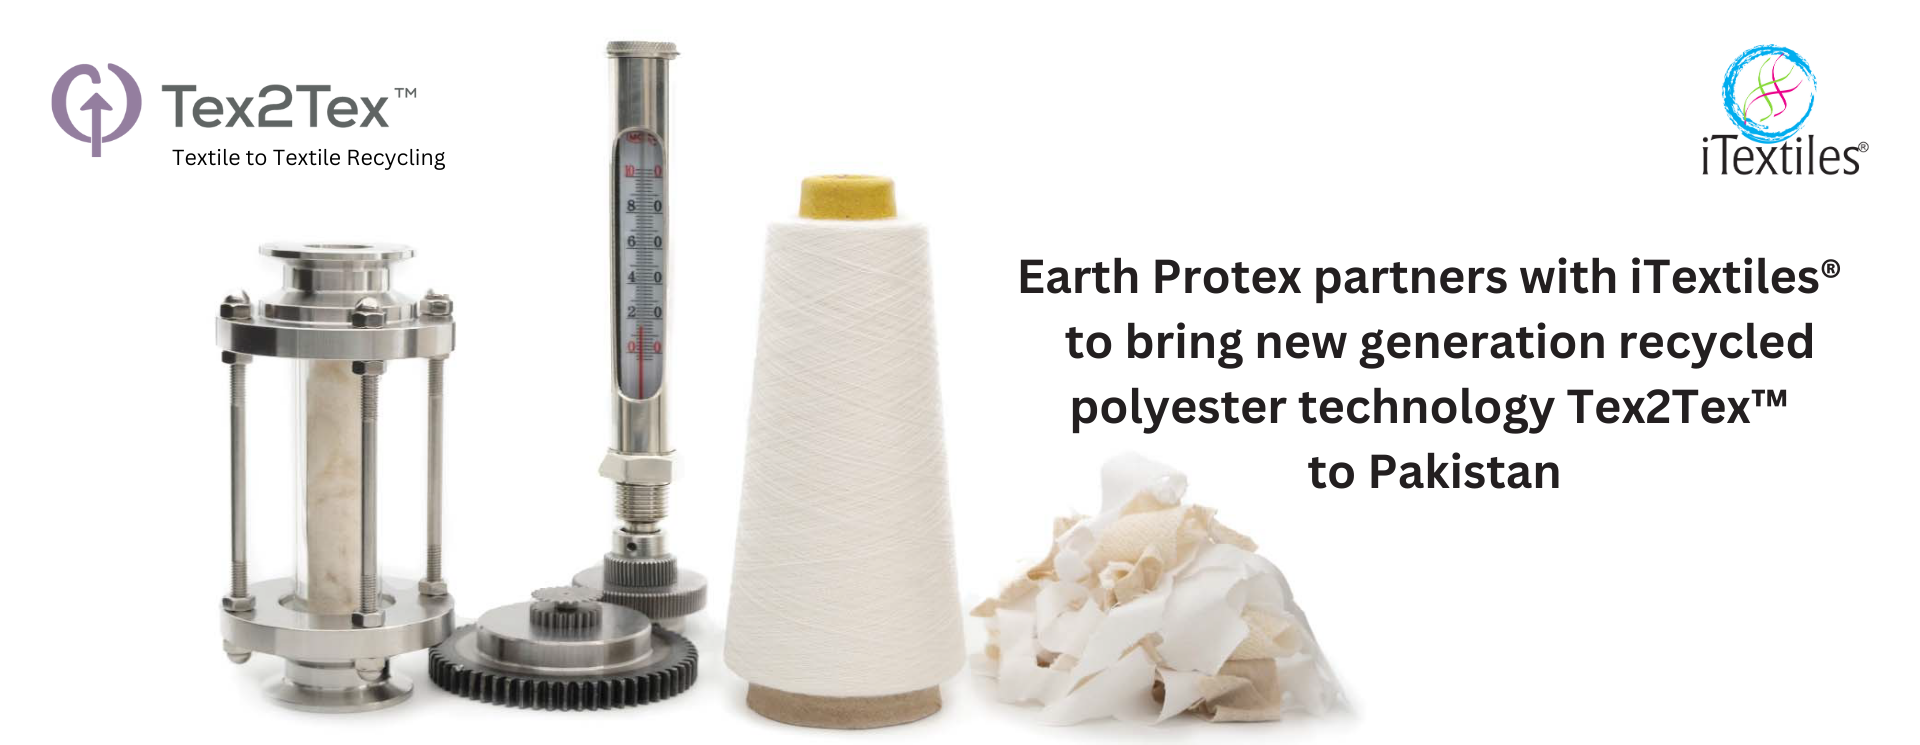  Earth Protex Corp partners with iTextiles®